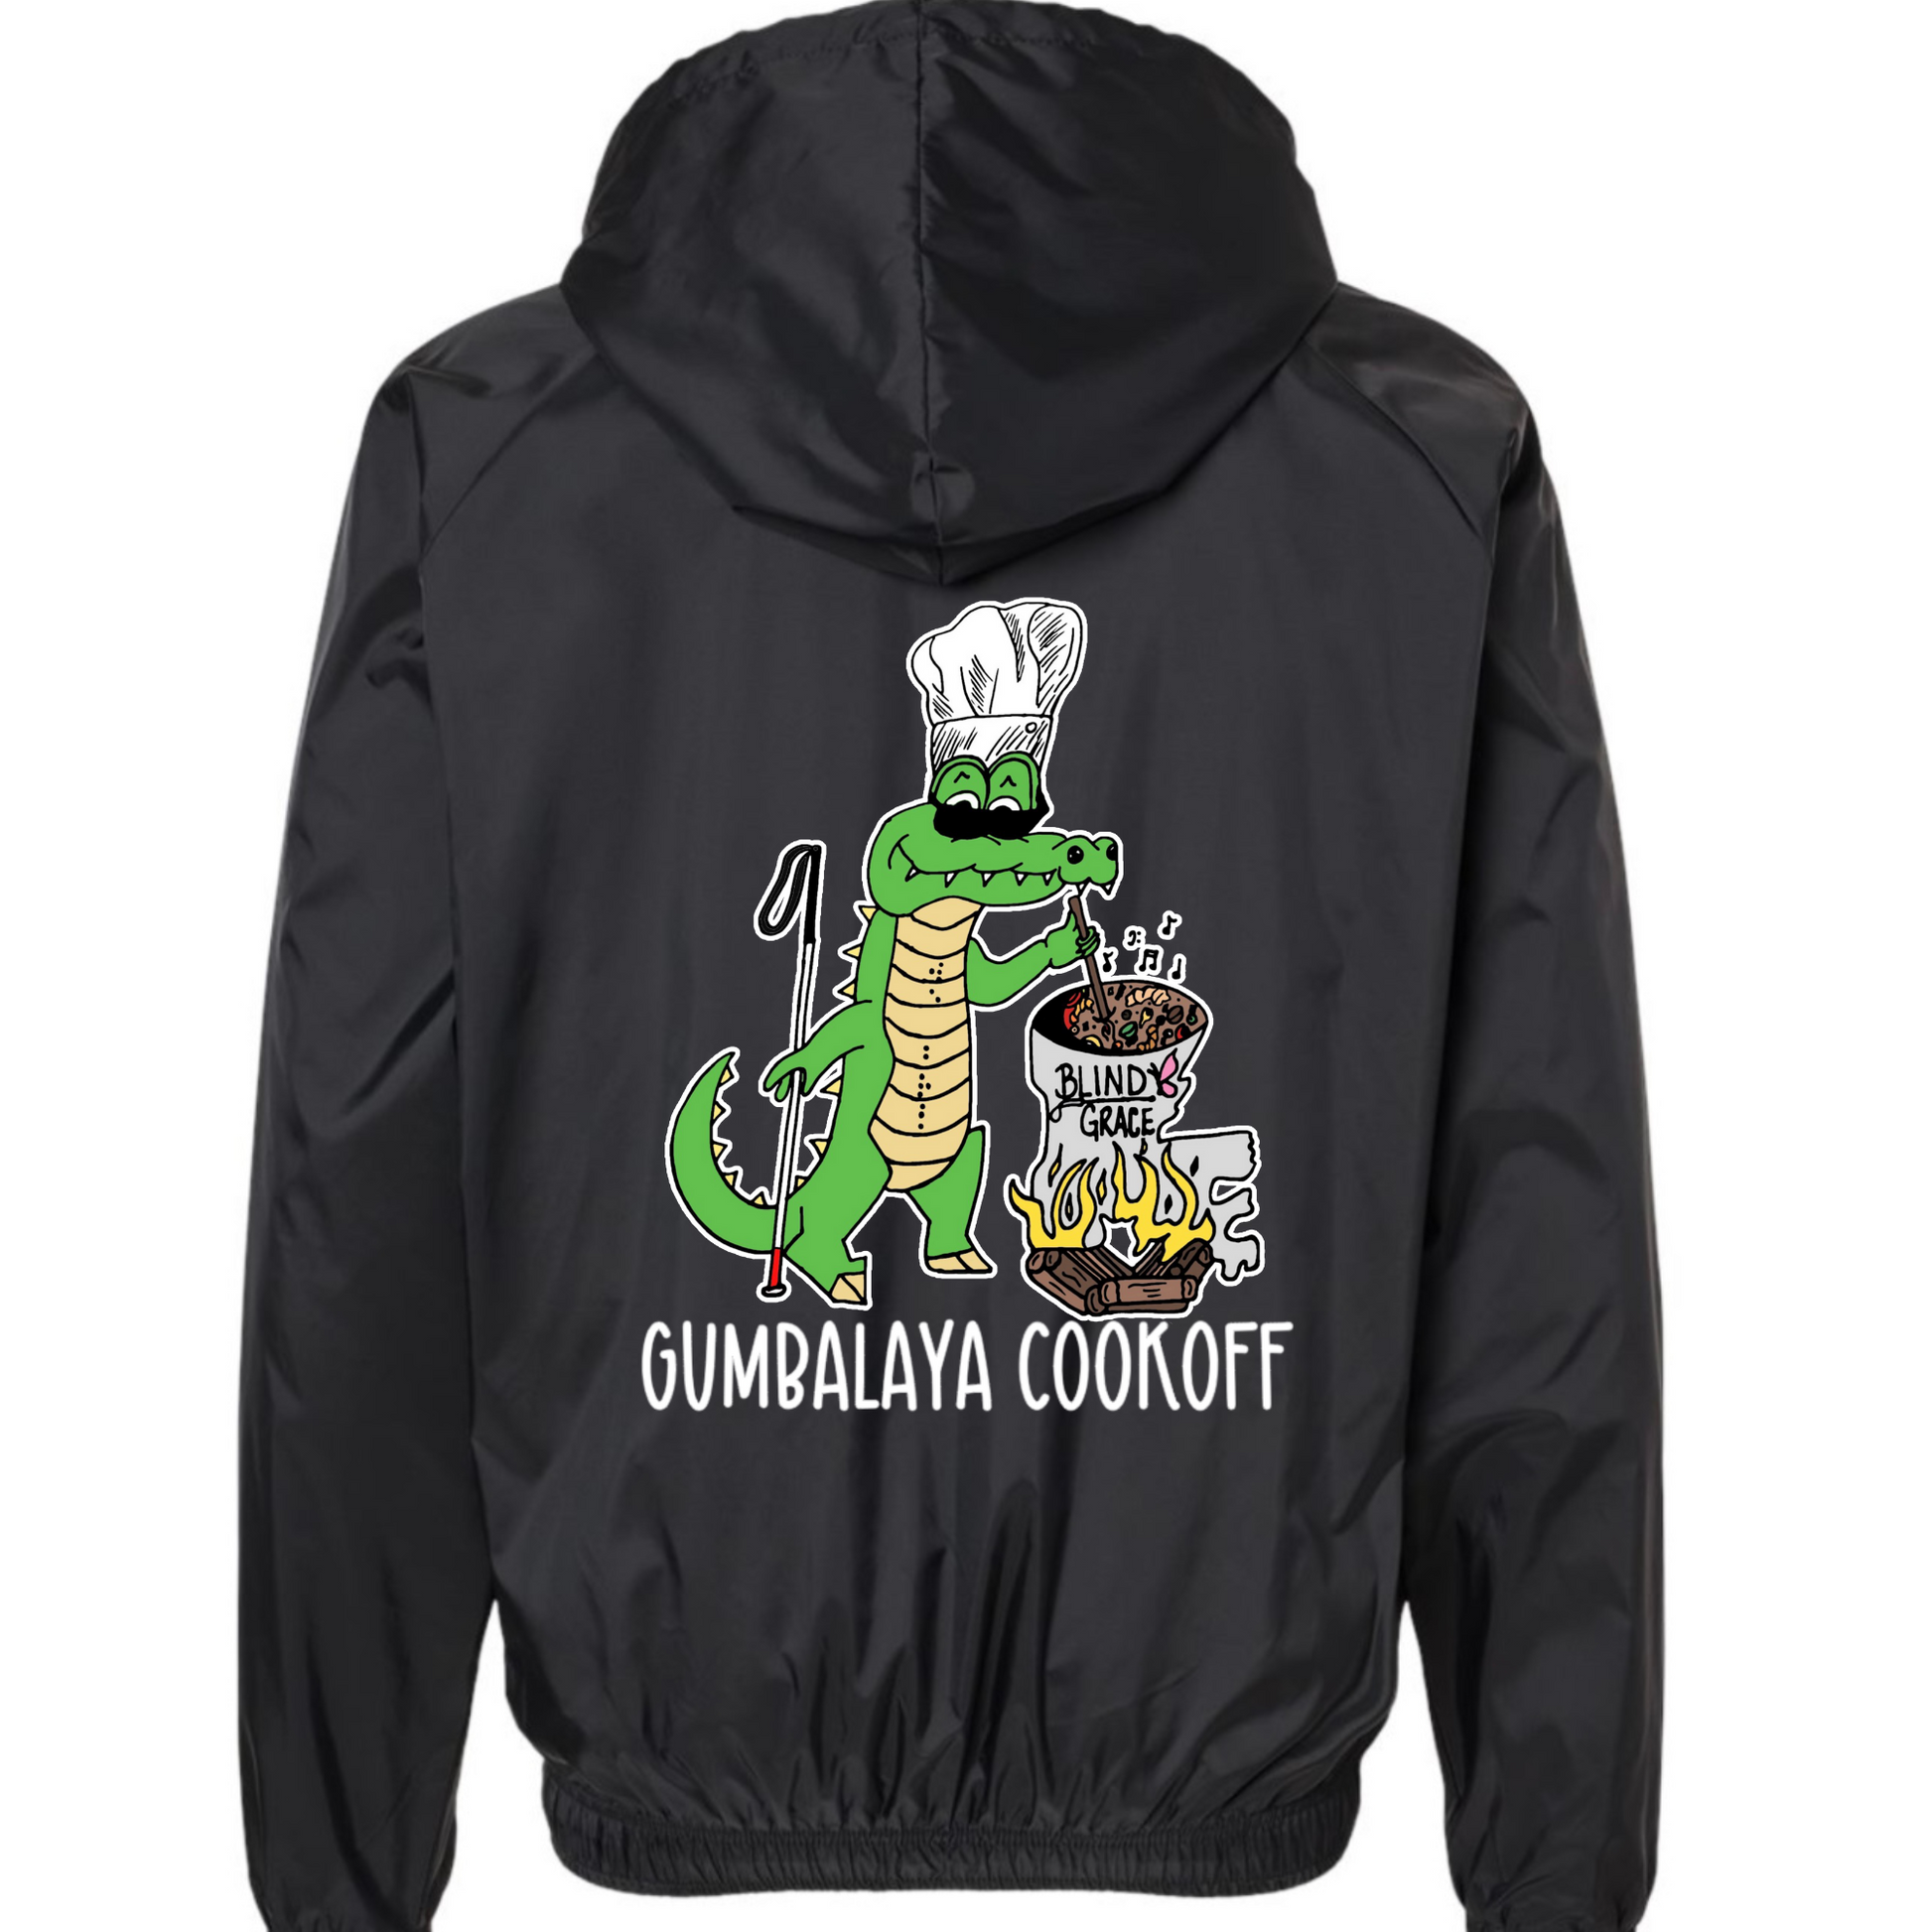 Back of black rain jacket with Gumbalaya logo (alligator with “we braille” down the chest cooking a pot of food that has Blind Grace logo on it) with GUMBALAYA COOKOFF under the logo 